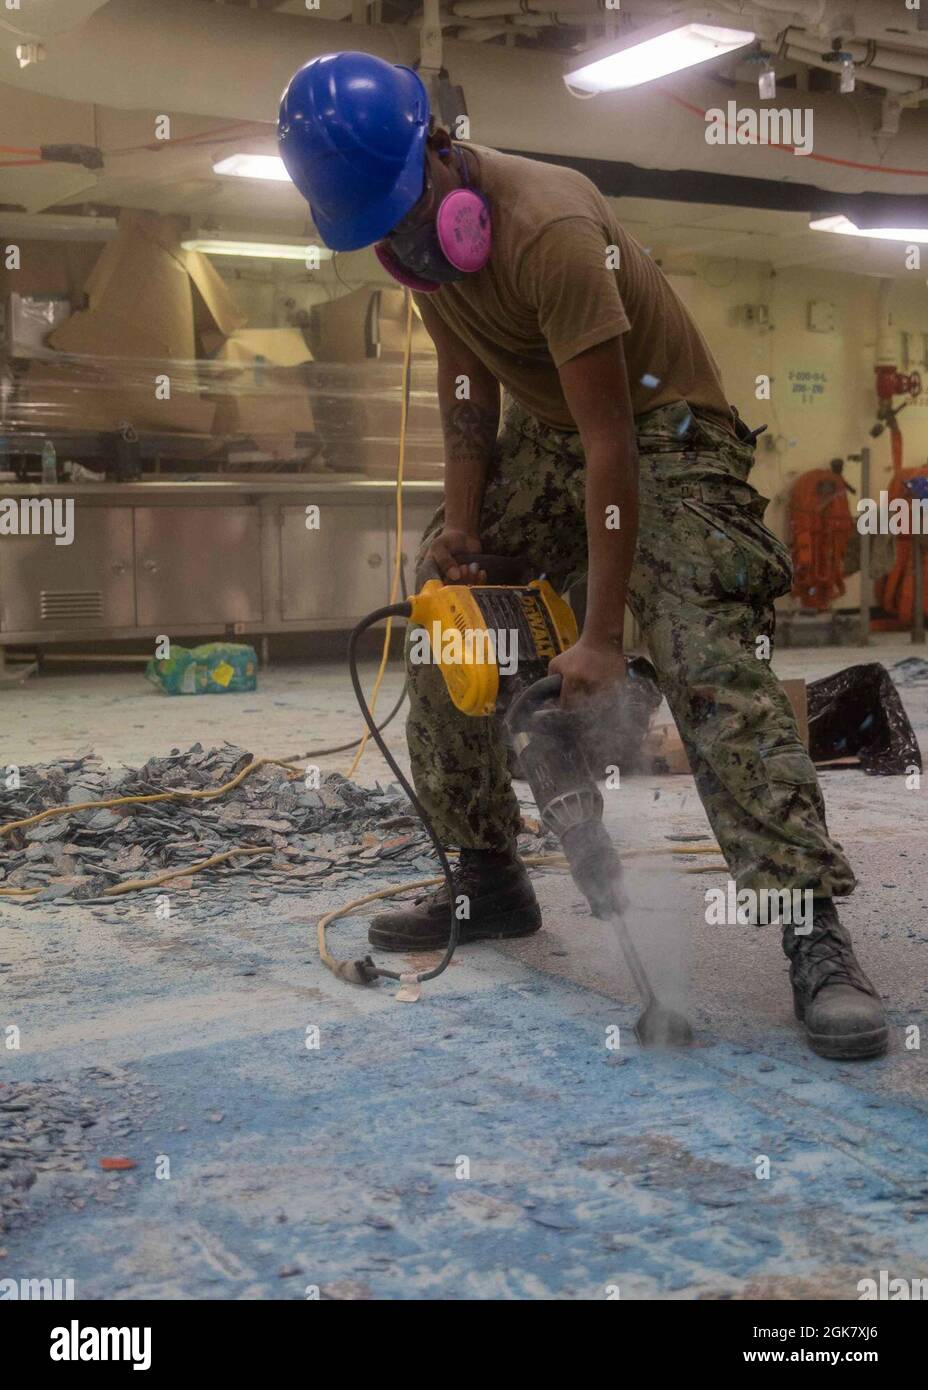 Aviation Boatswain's Mate (Handling) Airman Justin Miller, from Miami, assigned to USS Gerald R. Ford's (CVN 78) air department, removes PRORECO deck coating (PRC) in Ford’s aft galley, Aug. 31, 2021. PRC is a marine deck-coating made of a resin sealer and color epoxy that is designed to resist heavy abrasion, impact and other potential movements. Ford is moored at Newport News Shipyard in support of her Planned Incremental Availability (PIA), a six-month period of modernization, maintenance and repairs. Stock Photo